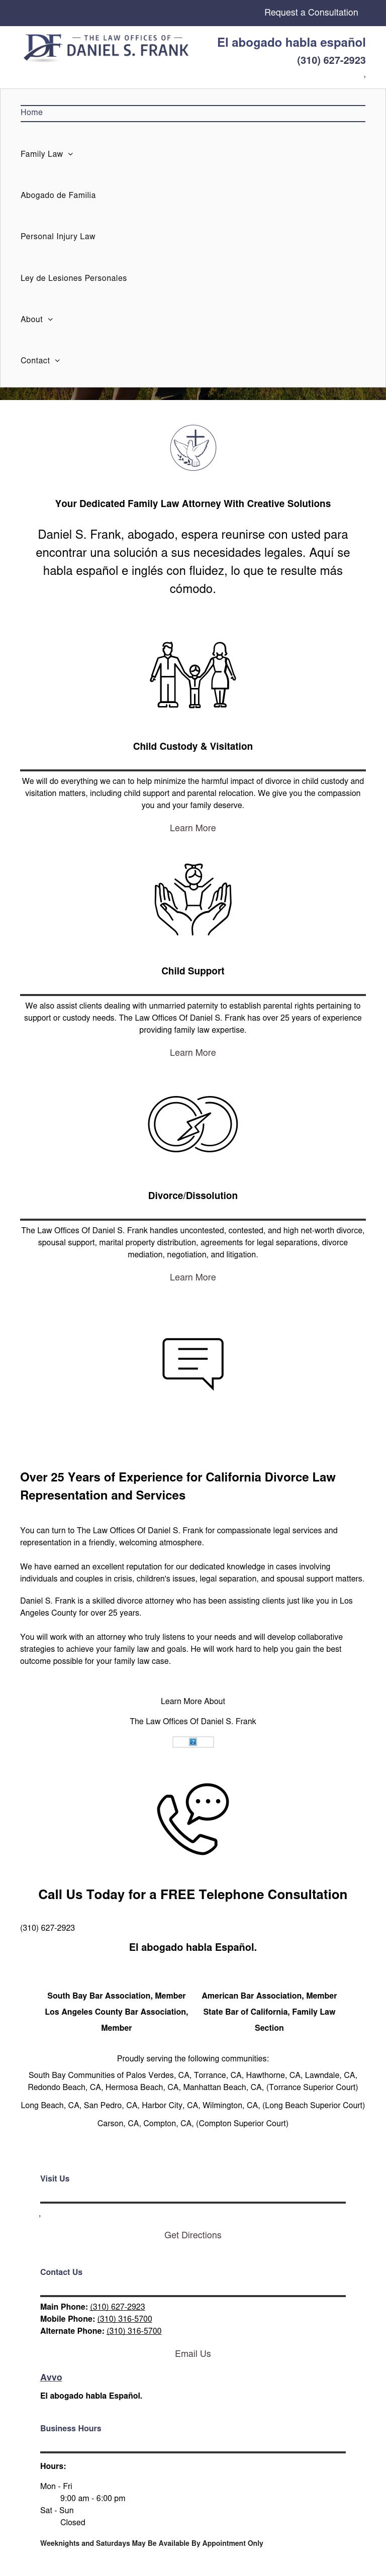 The Law Offices of Daniel S. Frank - Torrance CA Lawyers